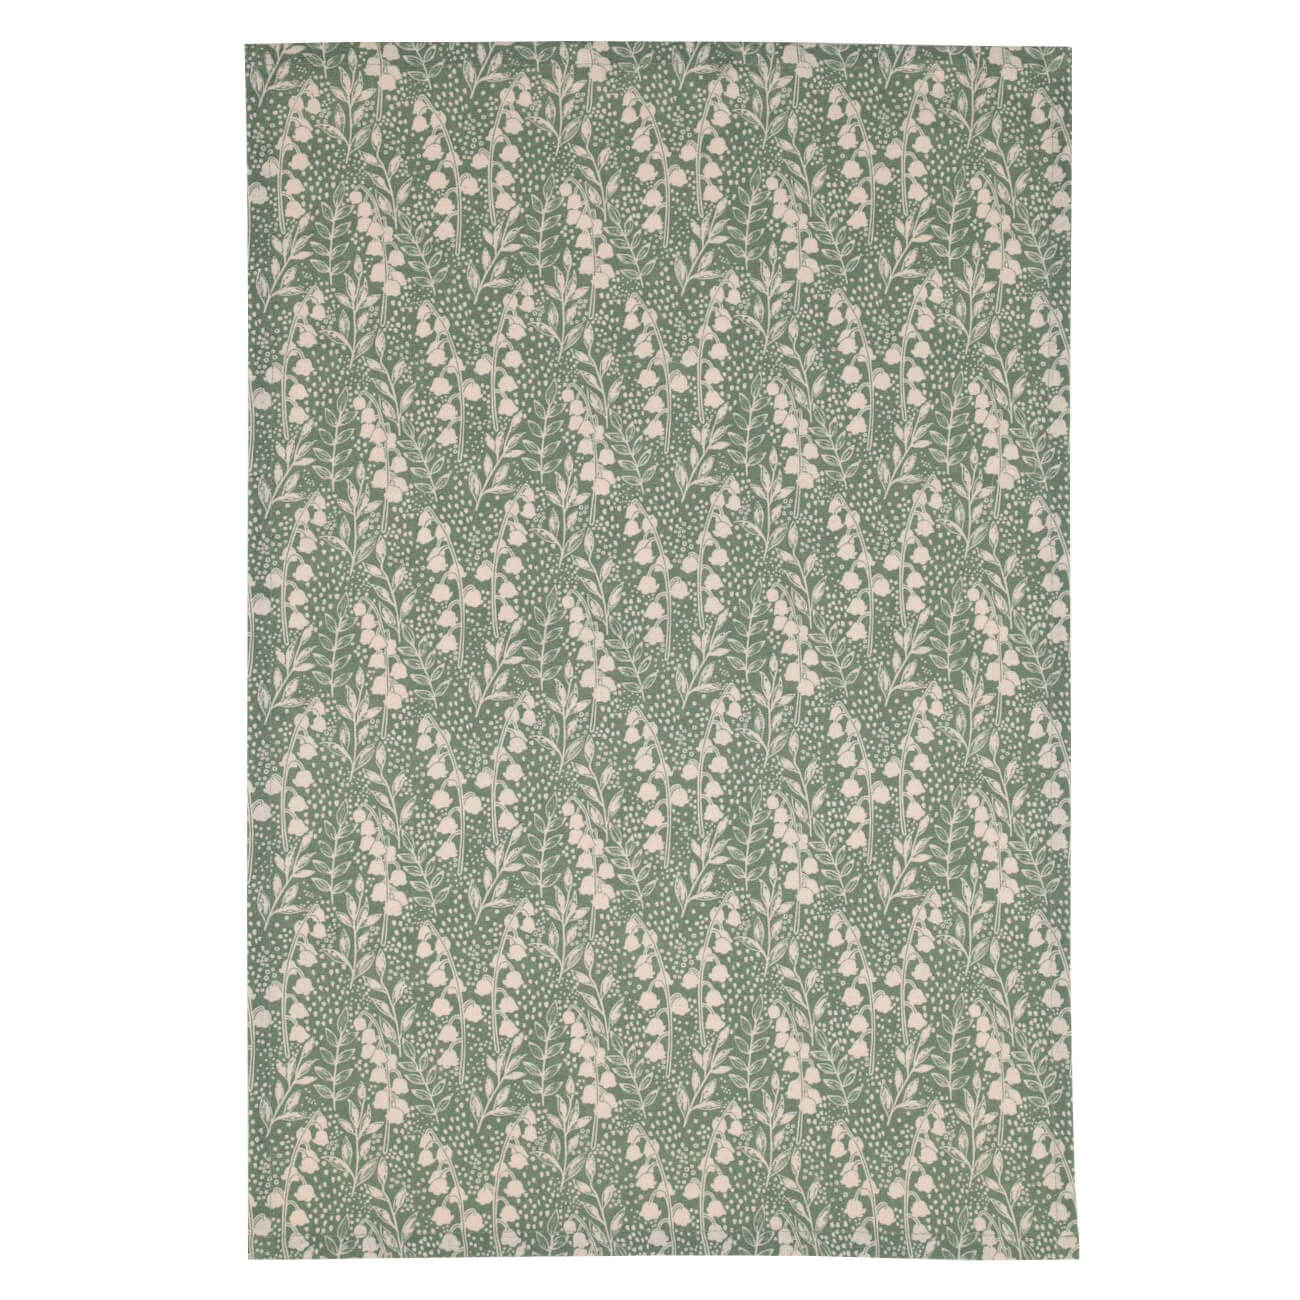 Kitchen towel, 40x60 cm, cotton, green, Lily of the valley, May-lily изображение № 1